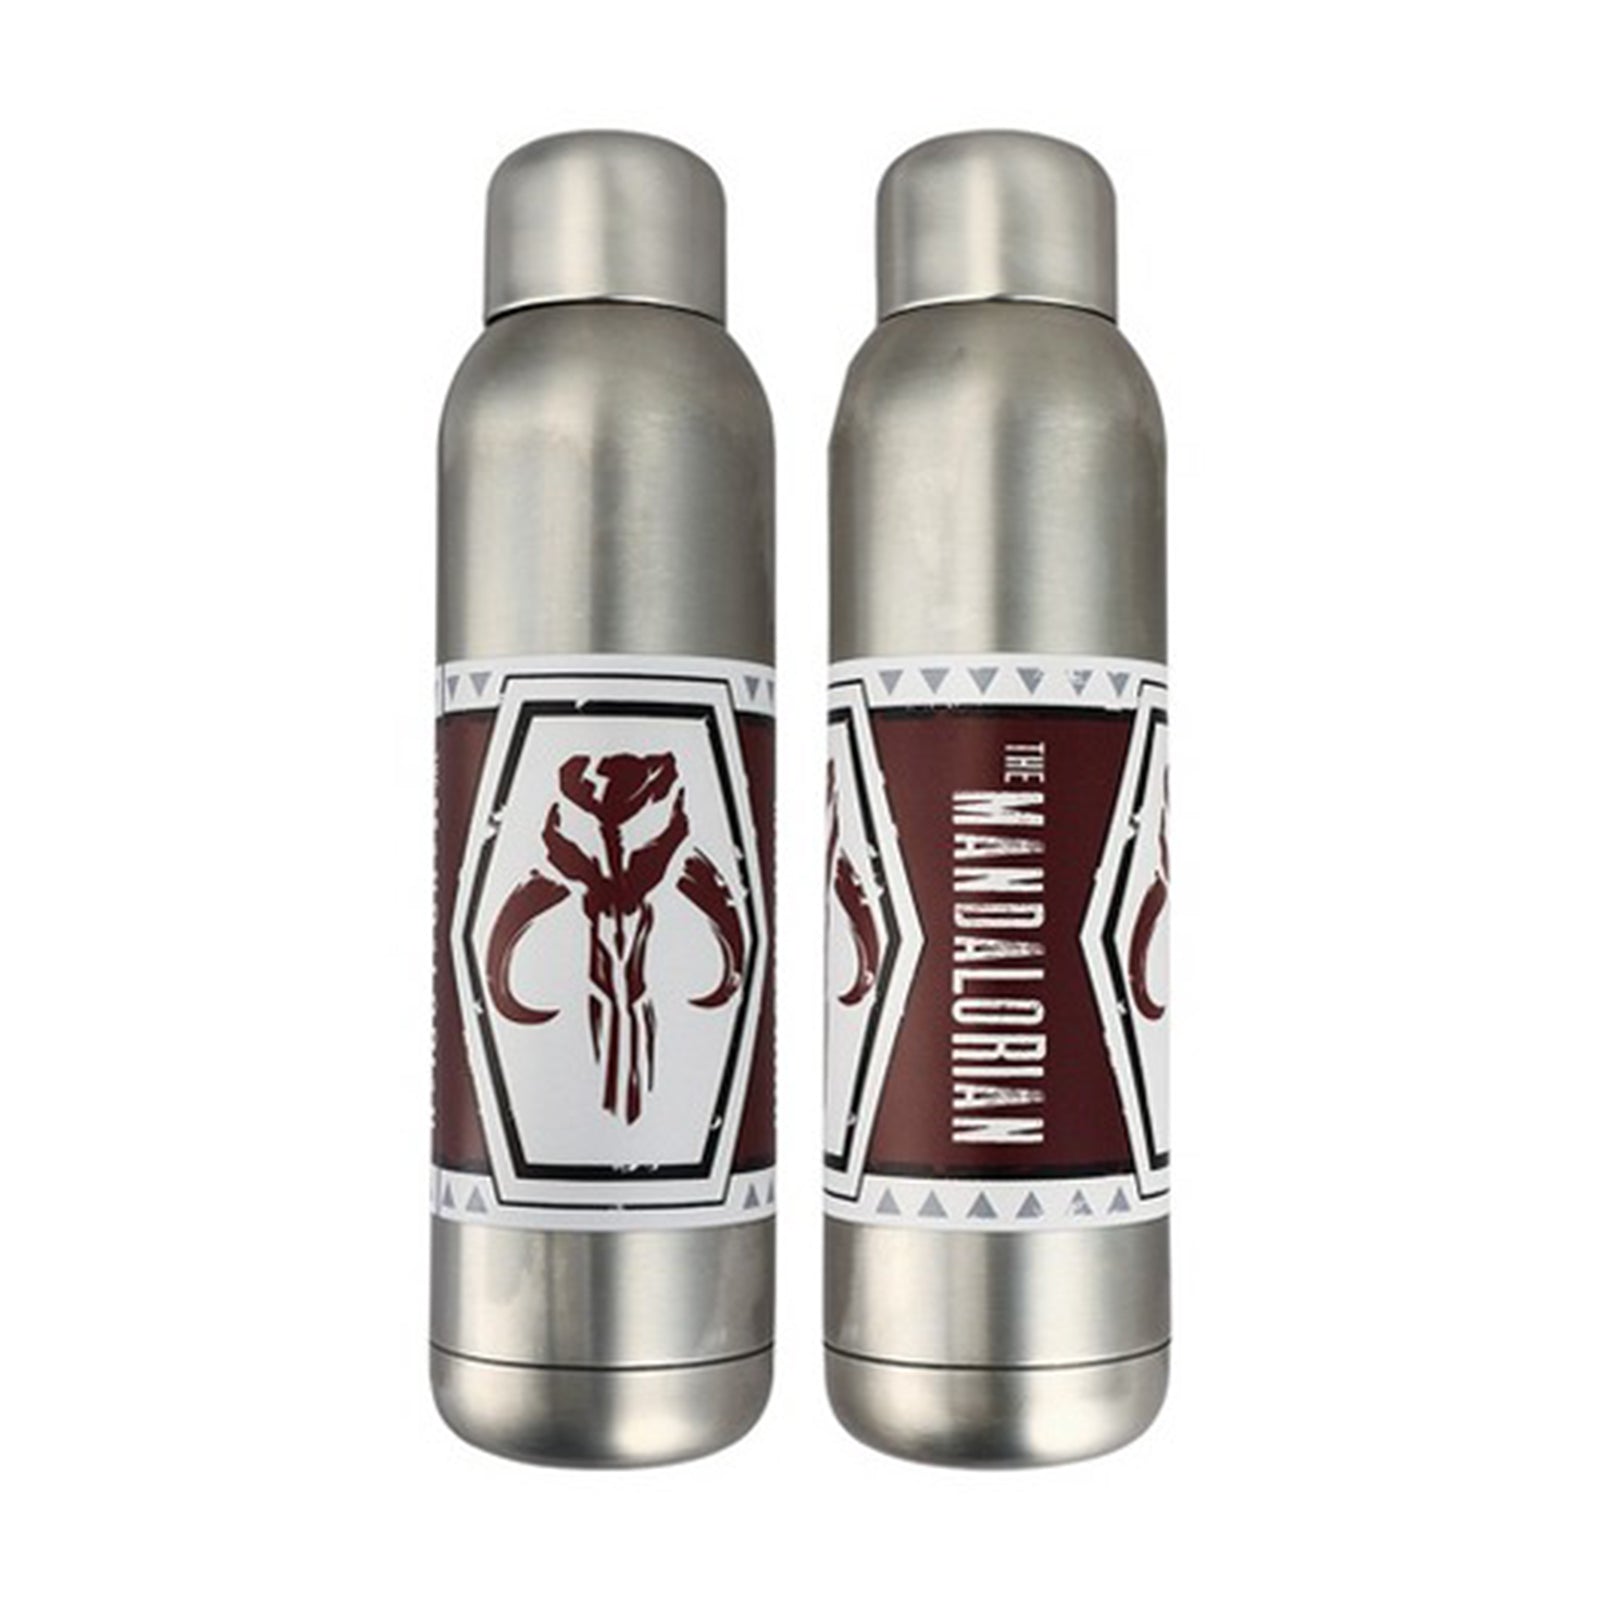 The Mandalorian Emerging From Shadows Stainless Steel Water Bottle